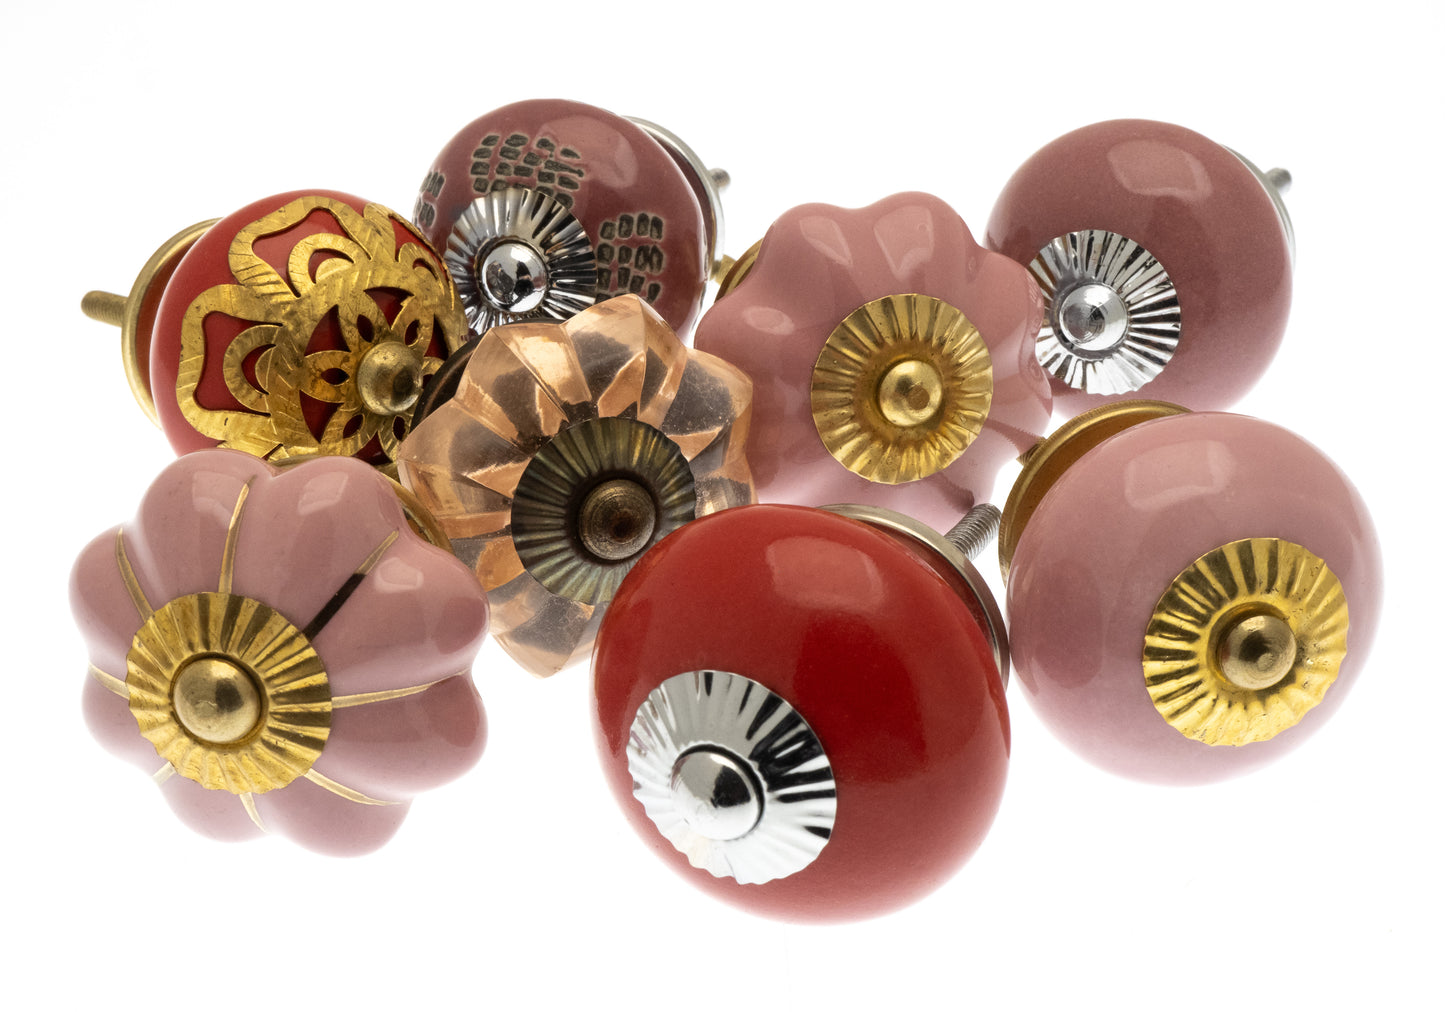 Ceramic Door Knobs - 8 Red & Pink Glass and Brass